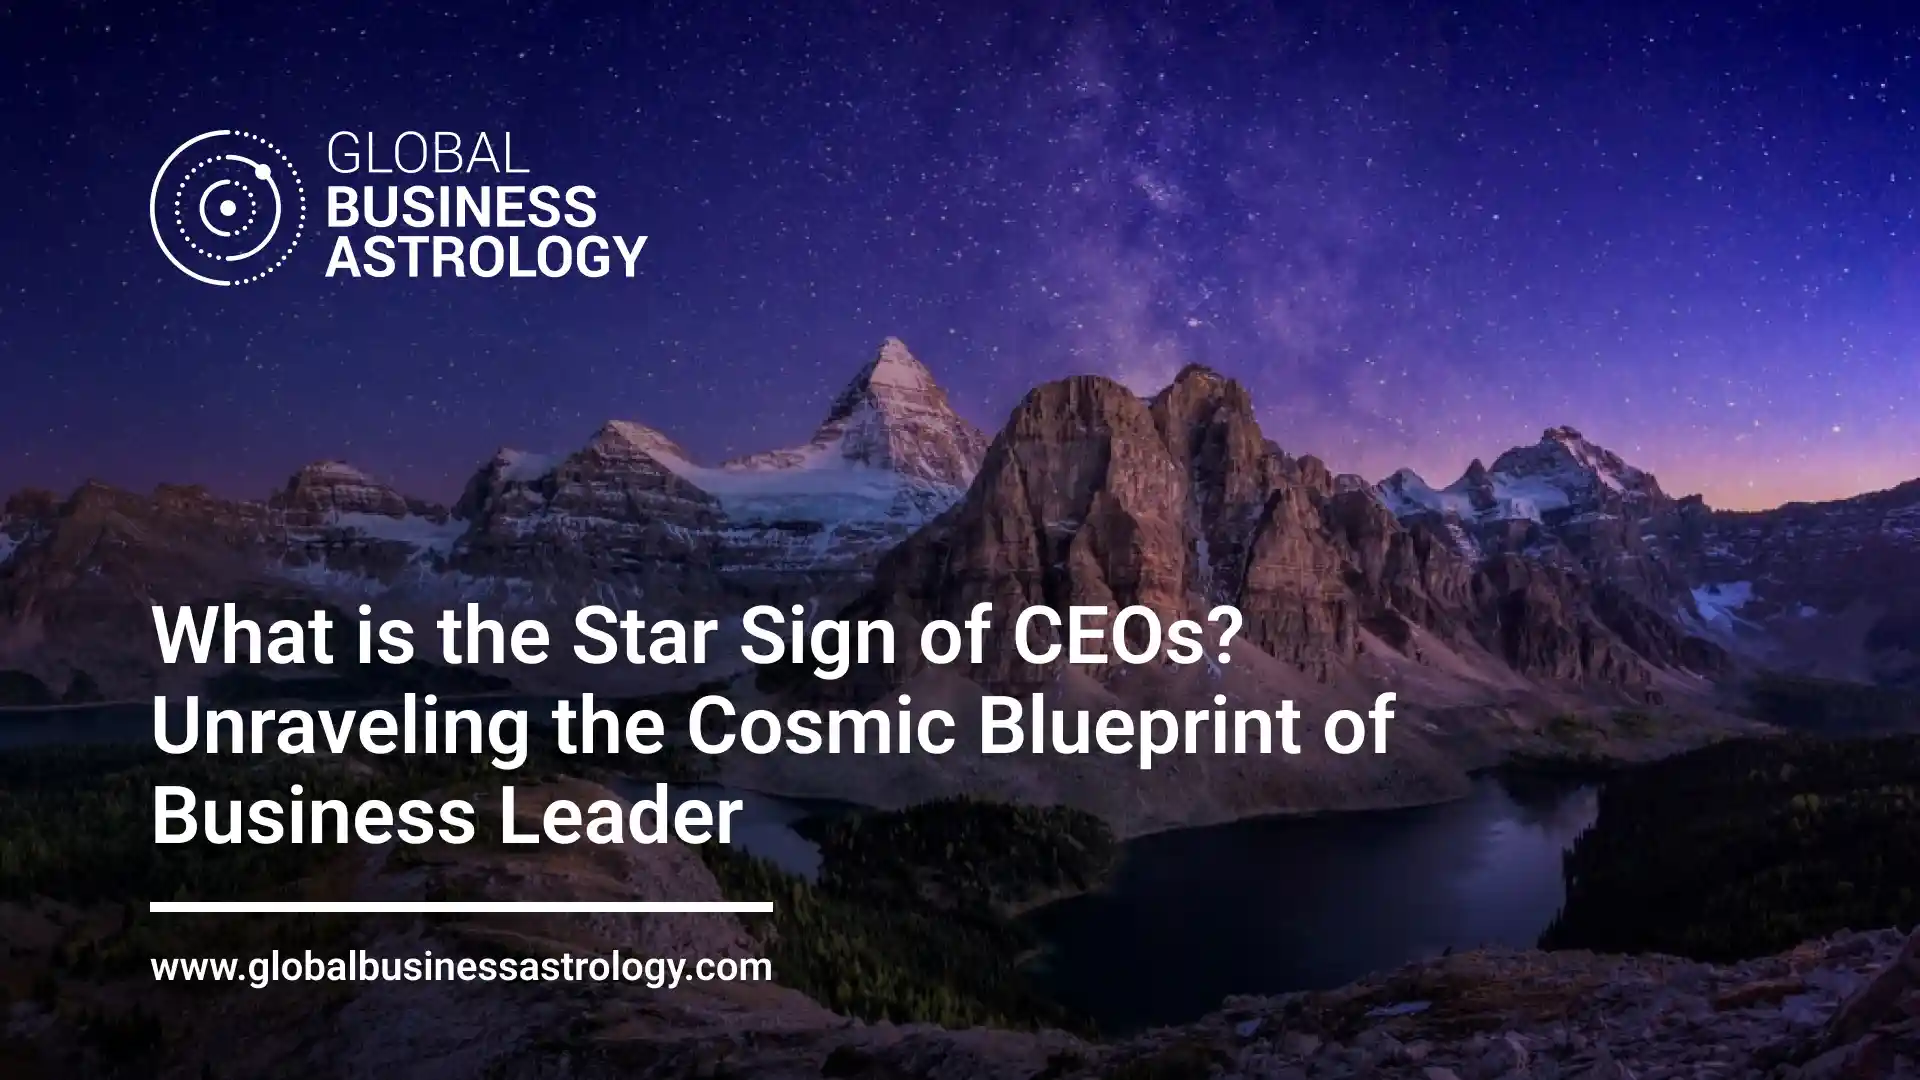 What is the Star Sign of CEOs? Unraveling the Cosmic Blueprint of Business Leader